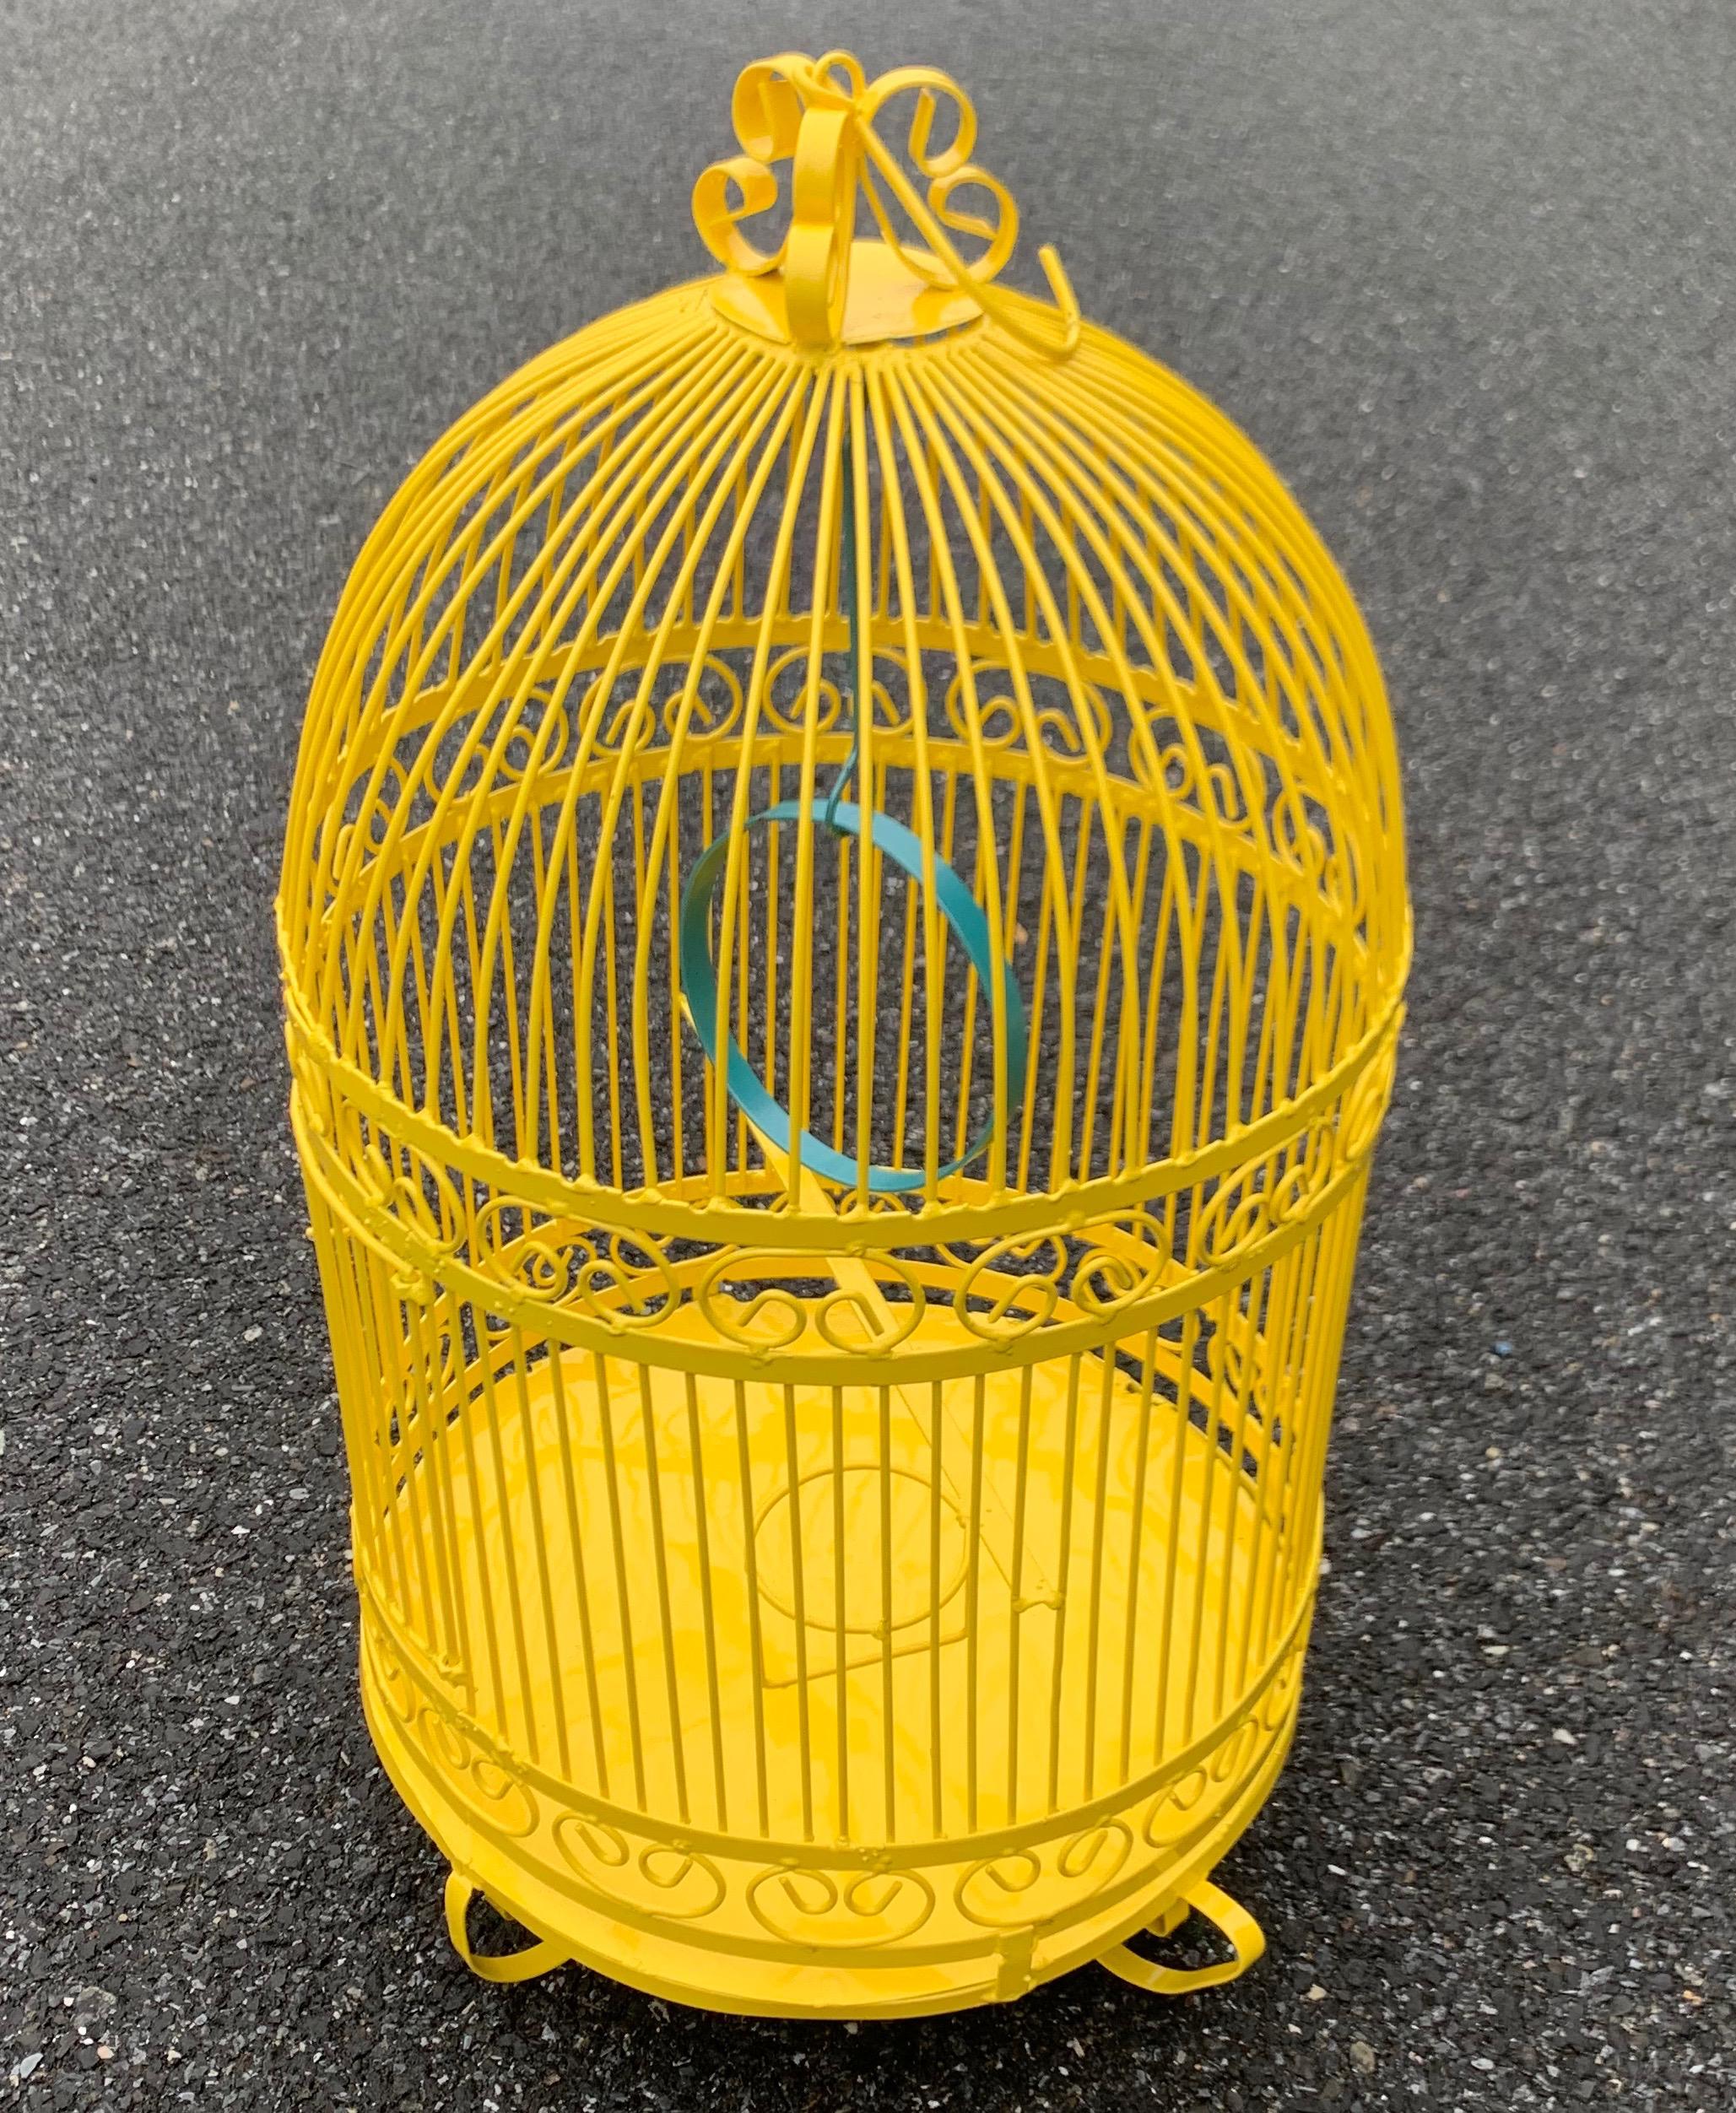 Vintage Metal Birdcage On Stand, Newly Powder-Coated In Bright Sunshine Yellow 7